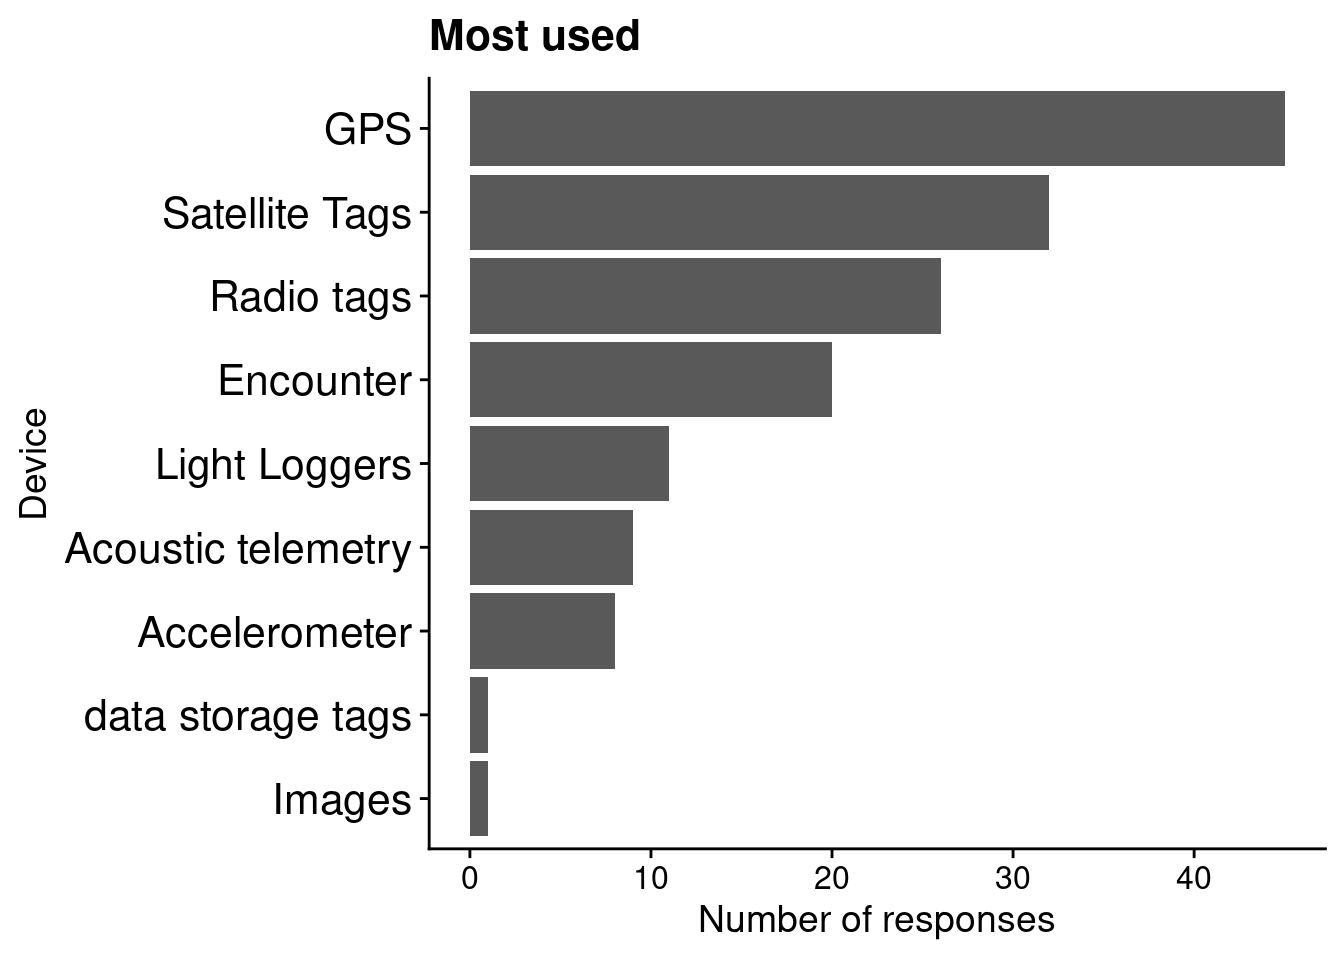 Horizontal bar plots indicating participants' votes on which devices are the most used. In decreasing order of votes: GPS, satellite tags, radio tags, encounter, light loggers, acoustic telemetry, accelerometer, data storage tags, and images.